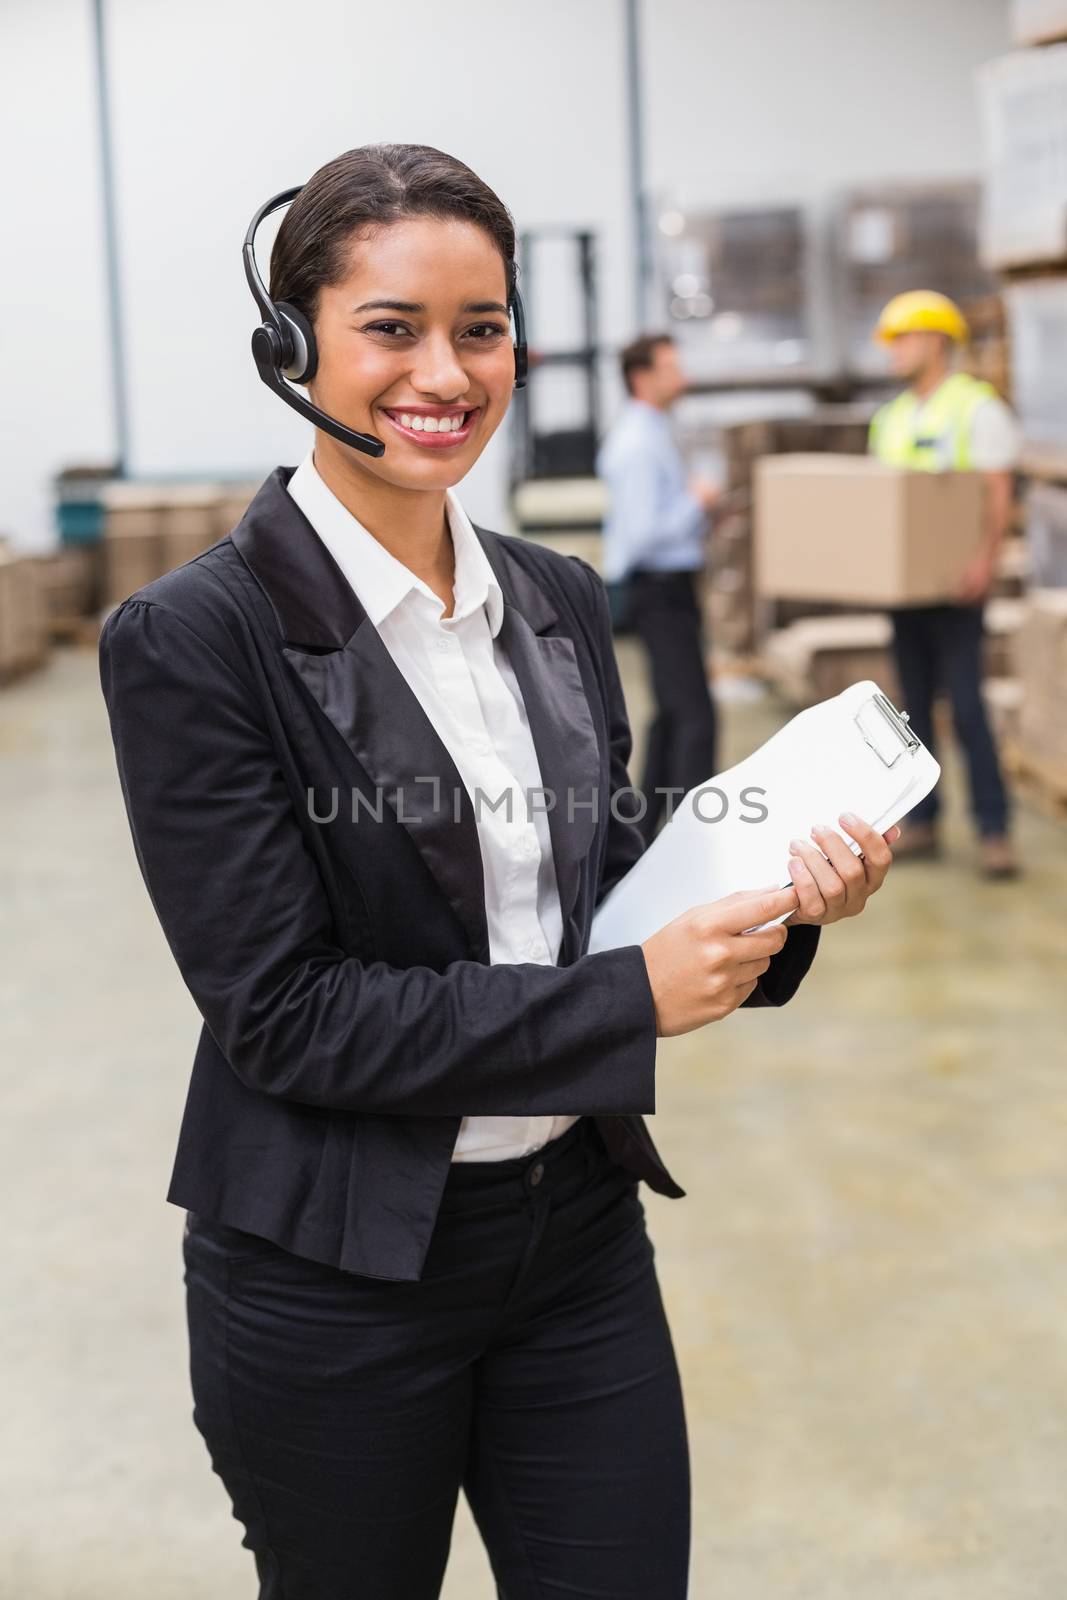 Warehouse manager wearing headset holding clipboard by Wavebreakmedia